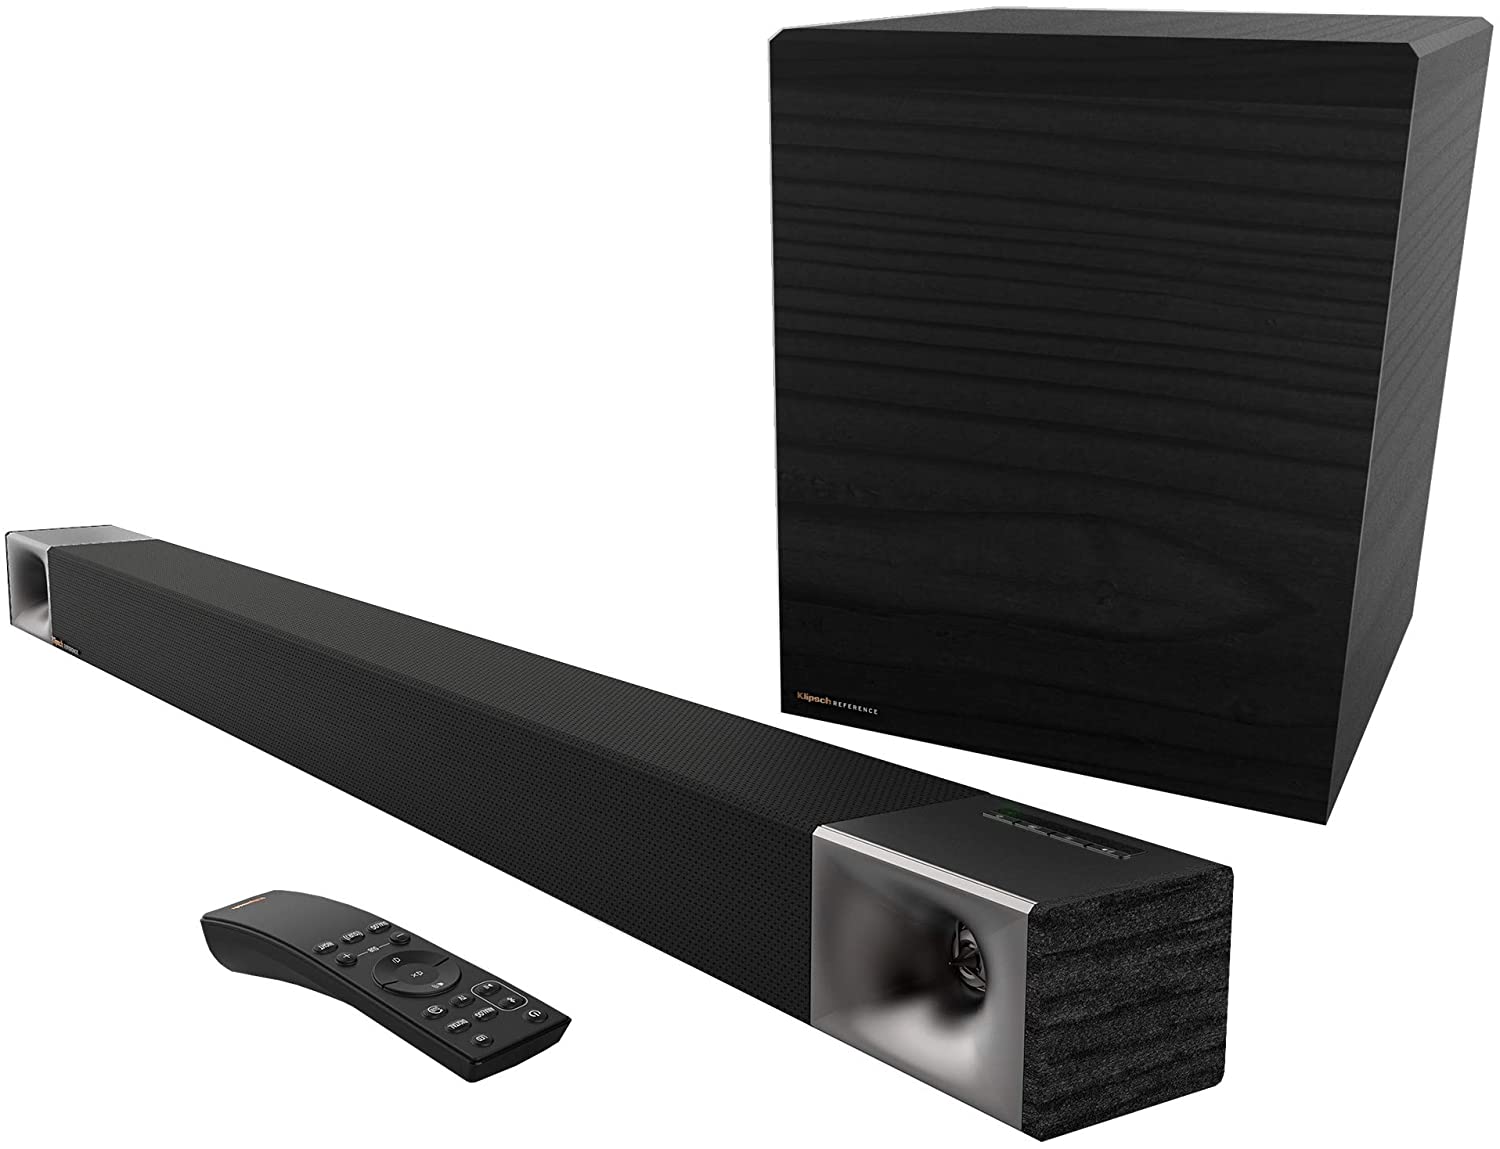 Best Multi-Channel Home Theatre System